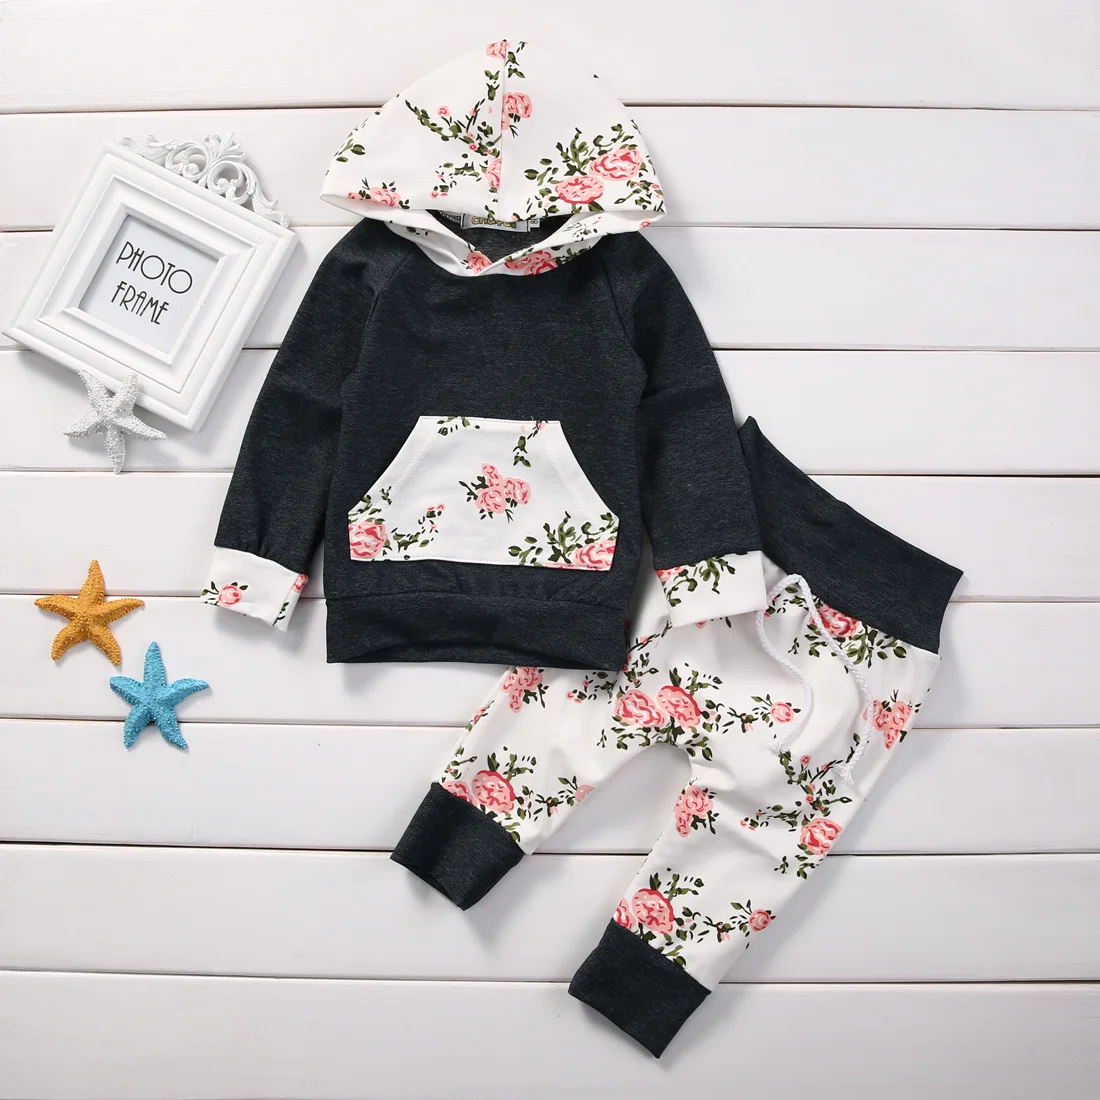 Autumn-Style-Infant-Clothes-Baby-Clothing-Sets-Newborn-Baby-Boy-Girl-Clothes-Hooded-TopsLong-Pants-Leggings-2pcs-Outfits-Set-1